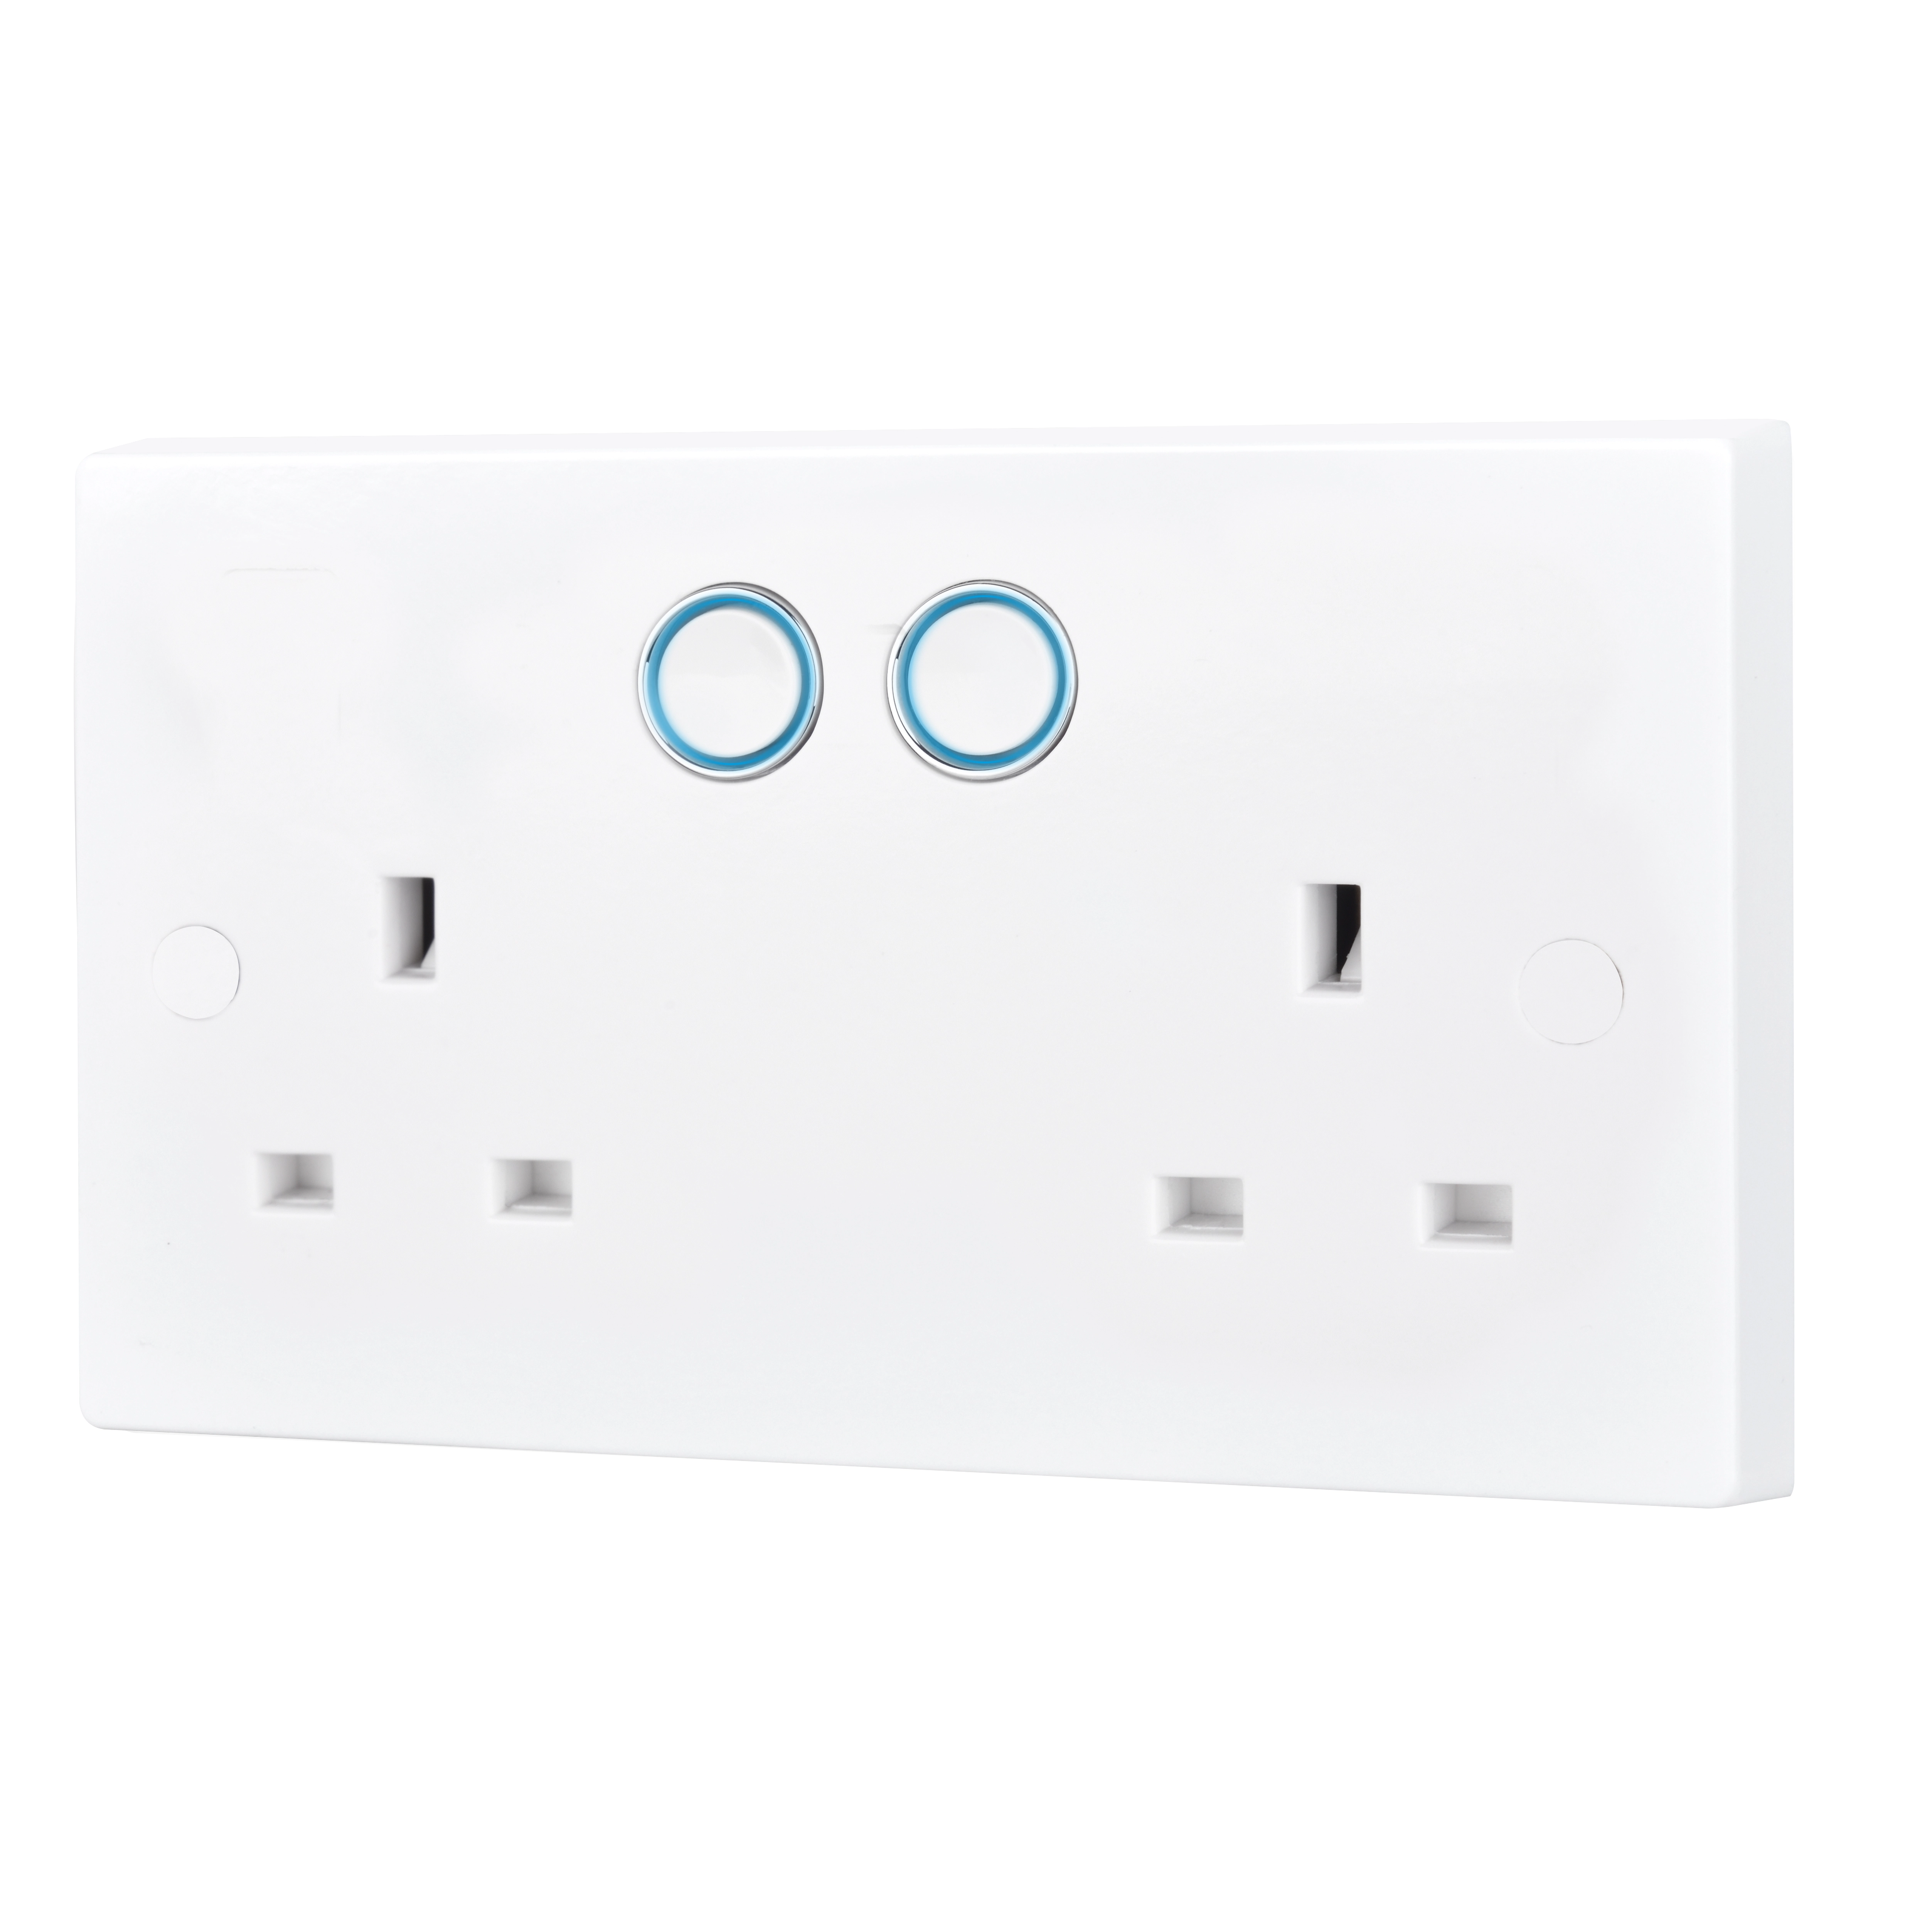 922HC_01-BGWifiControlledWallSocket(UK)-A1-with-Screw-covers_On.png